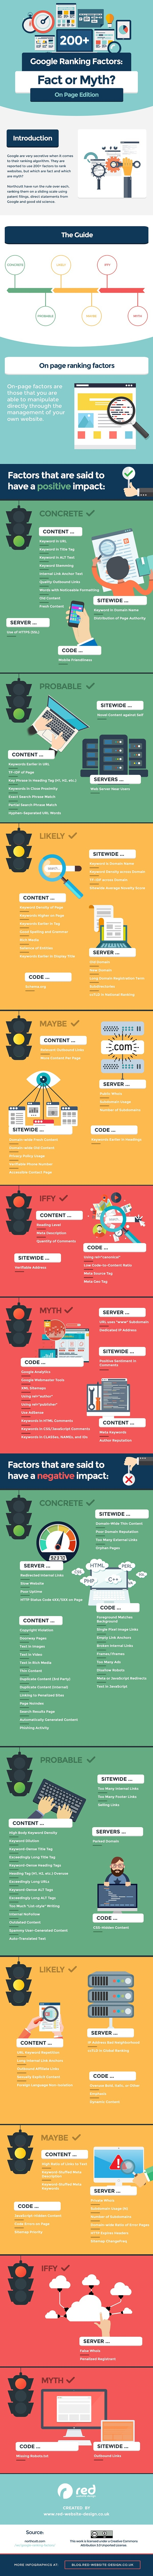 On-Page-SEO-Ranking-Factors-True-or-False-Infographic-compressed.jpg